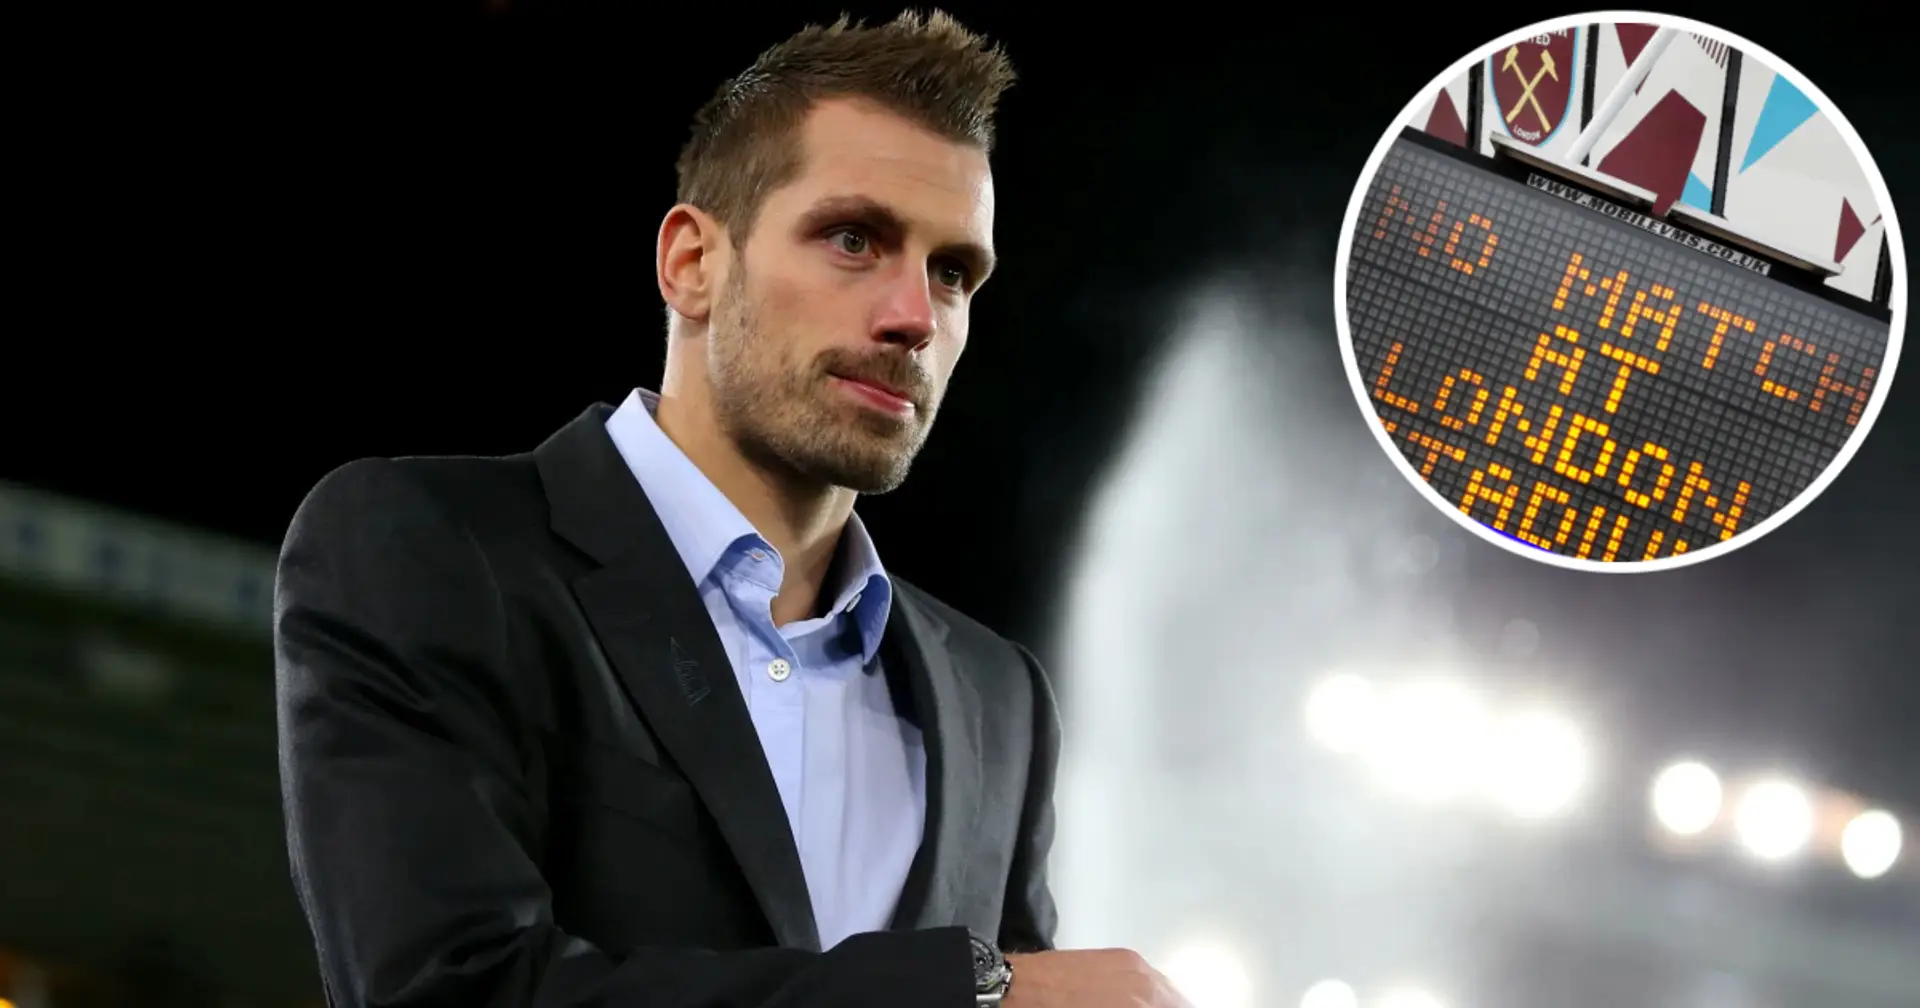 Ex-United man Schneiderlin calls on Premier League season to be extended: 'We are prepared to play until August'